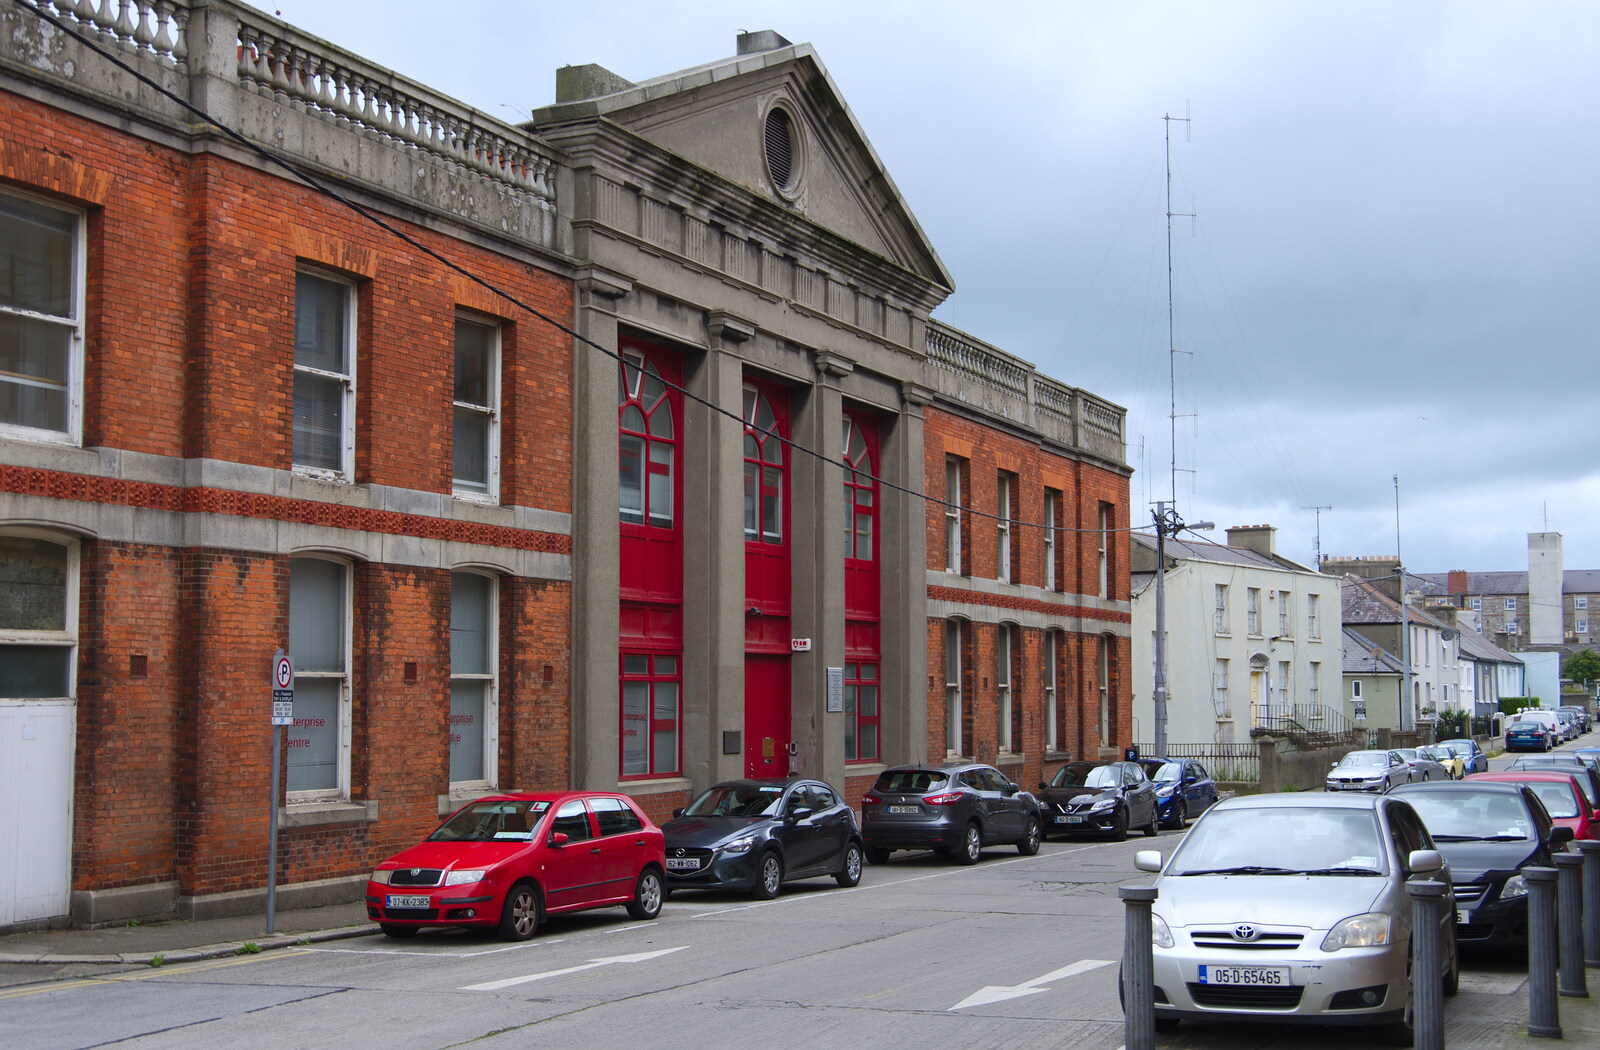 The old fire station in Dun Laoghaire from Jimmy and Catherina's, Ballsbridge, Dublin - 10th August 2019